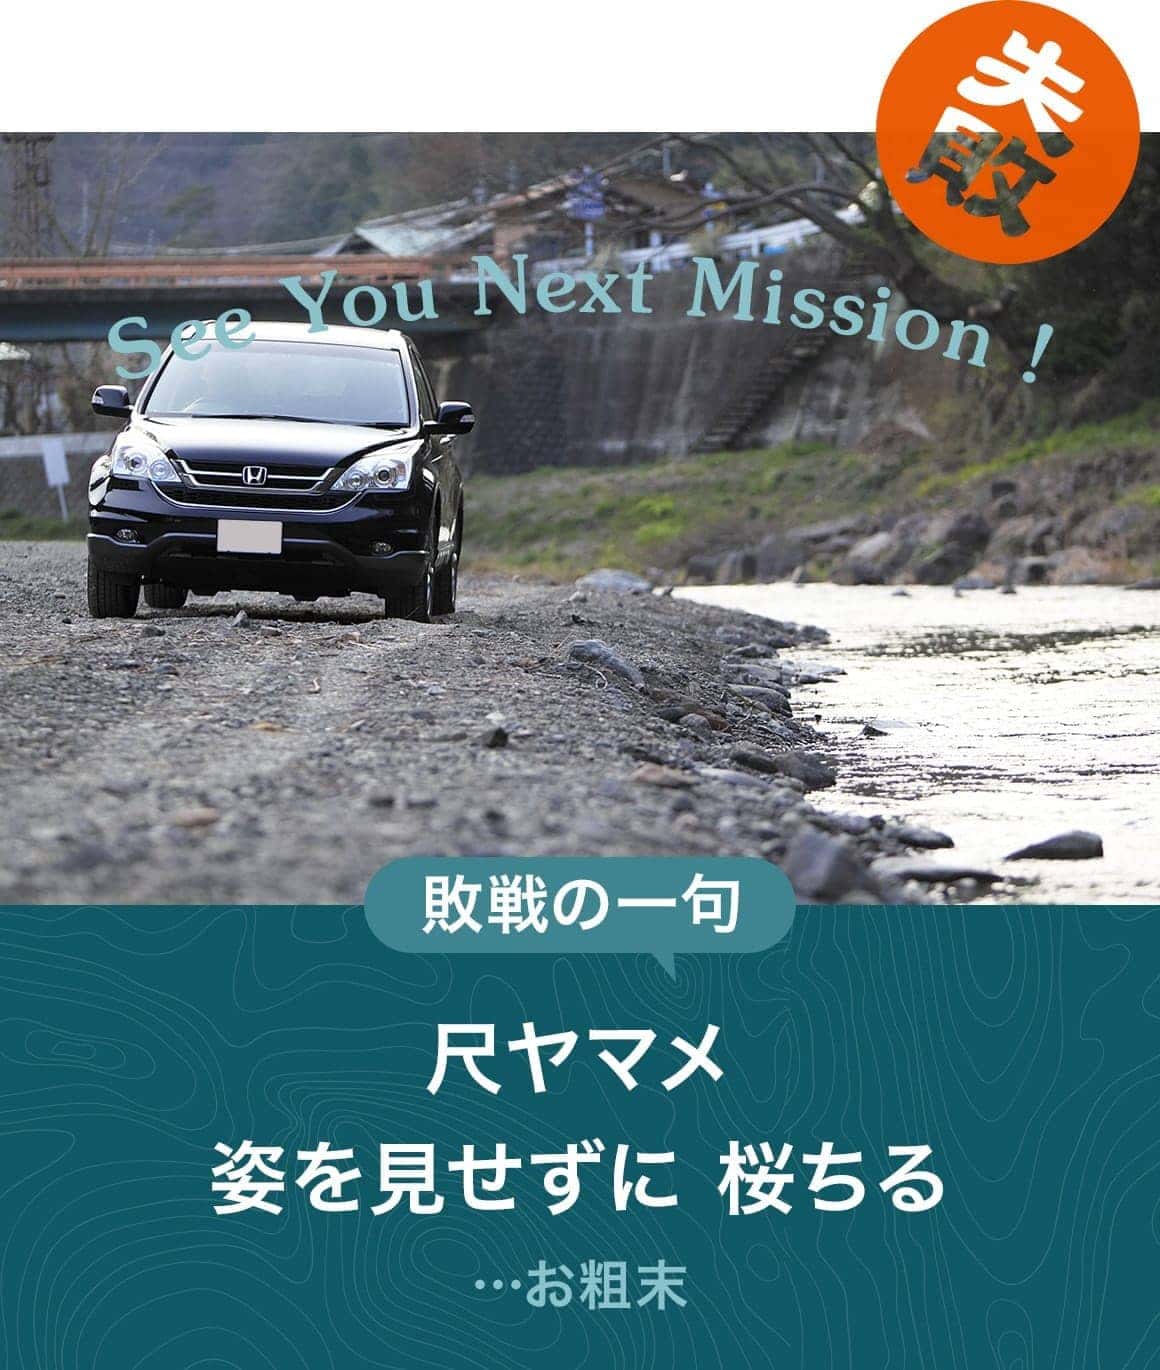 SEE YOU NEXT MISSION! | 失敗　敗北の一句「尺ヤマメ　姿を見ずに　桜散る」